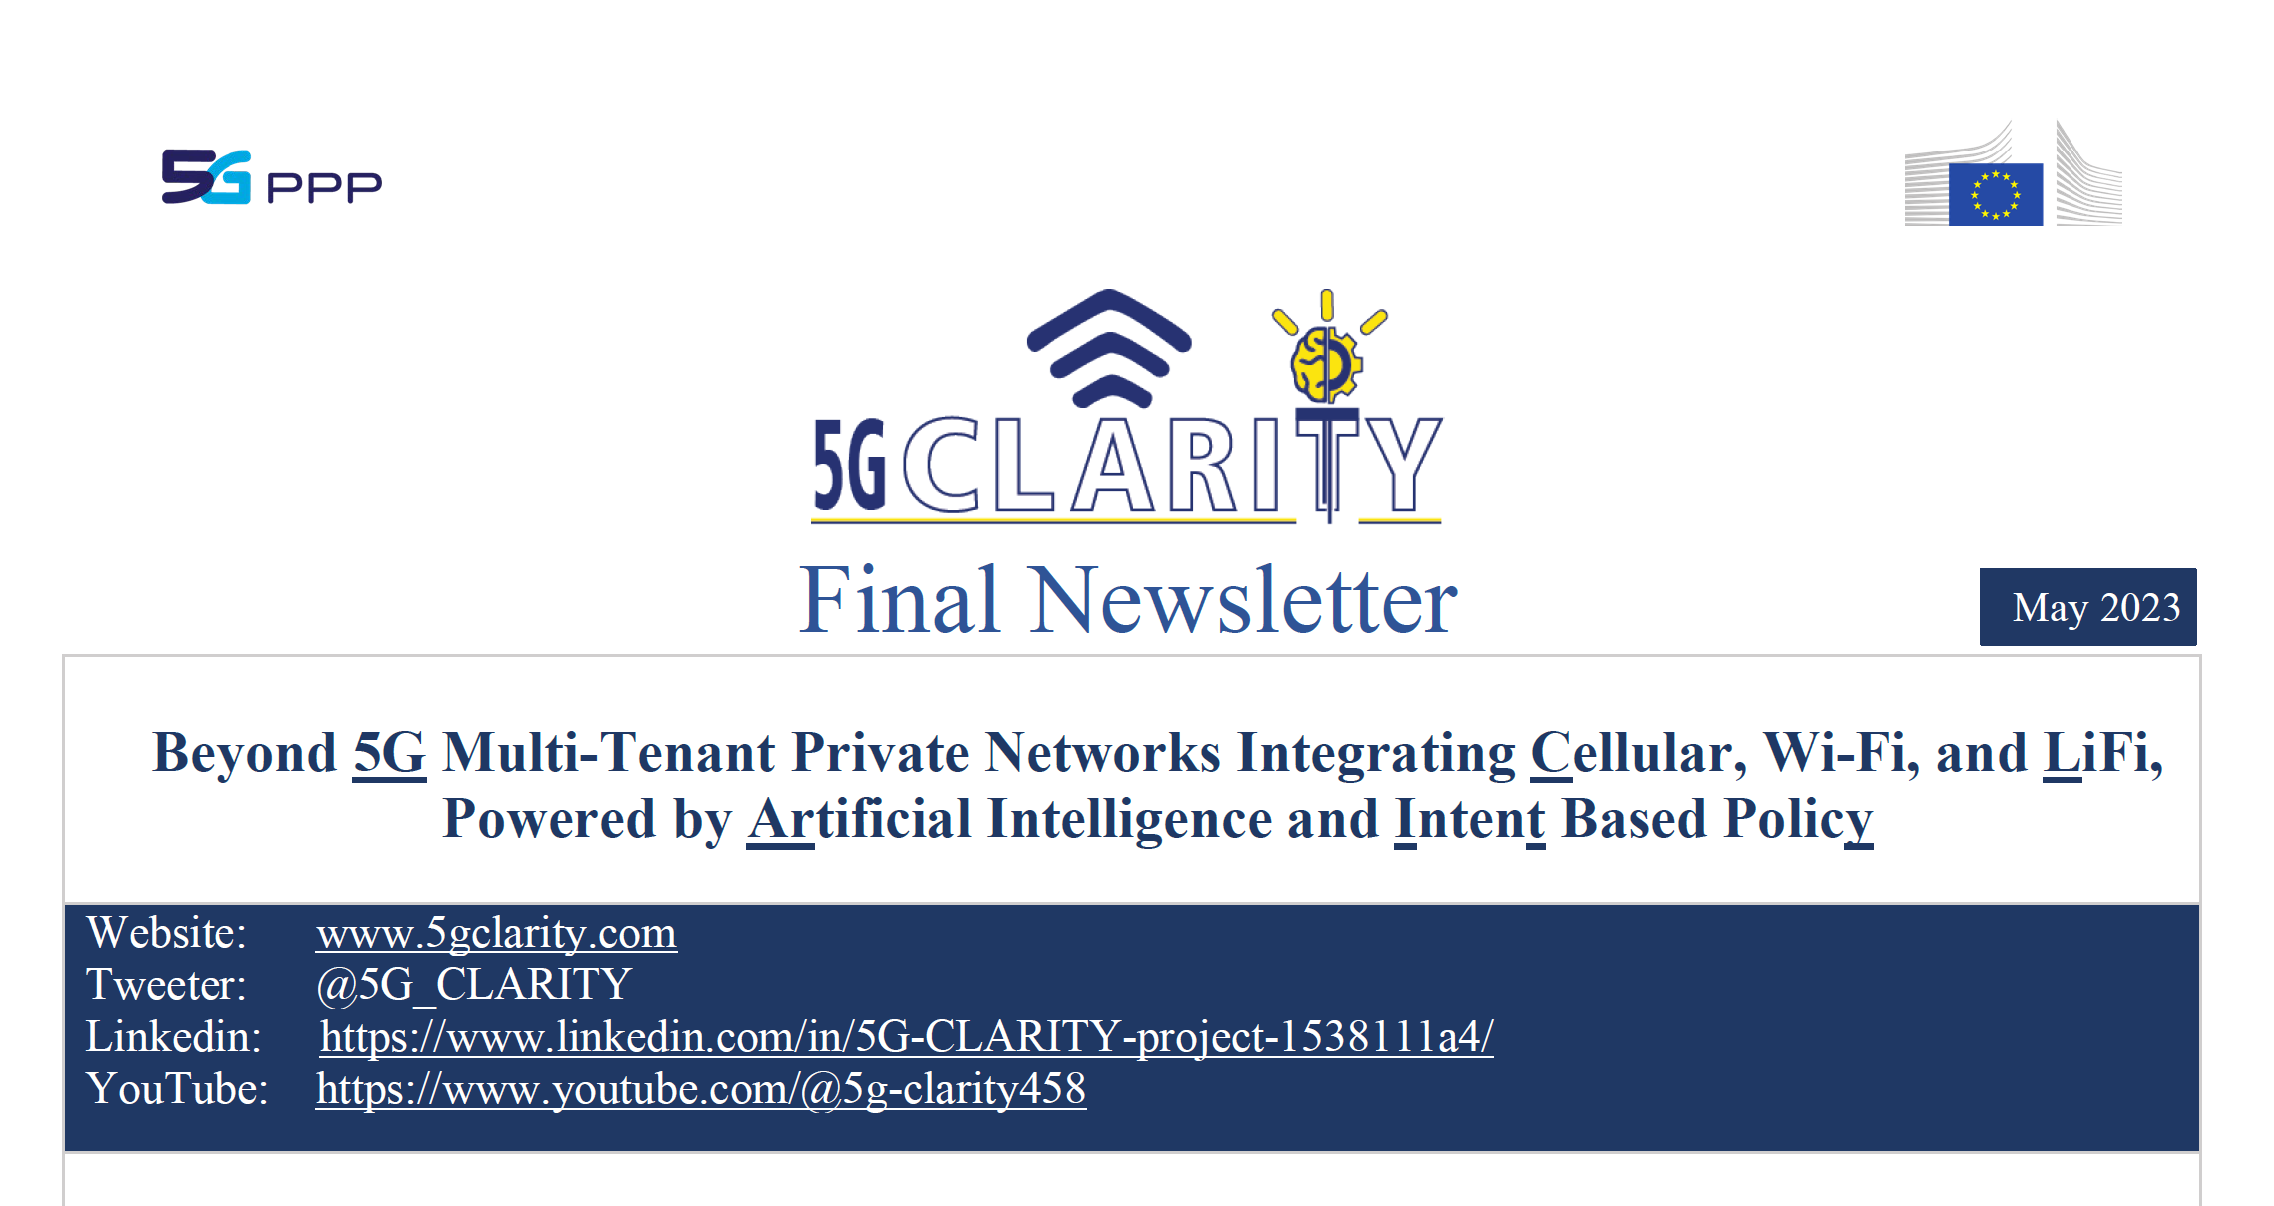 5G-CLARITY Project Final Newsletter Released!